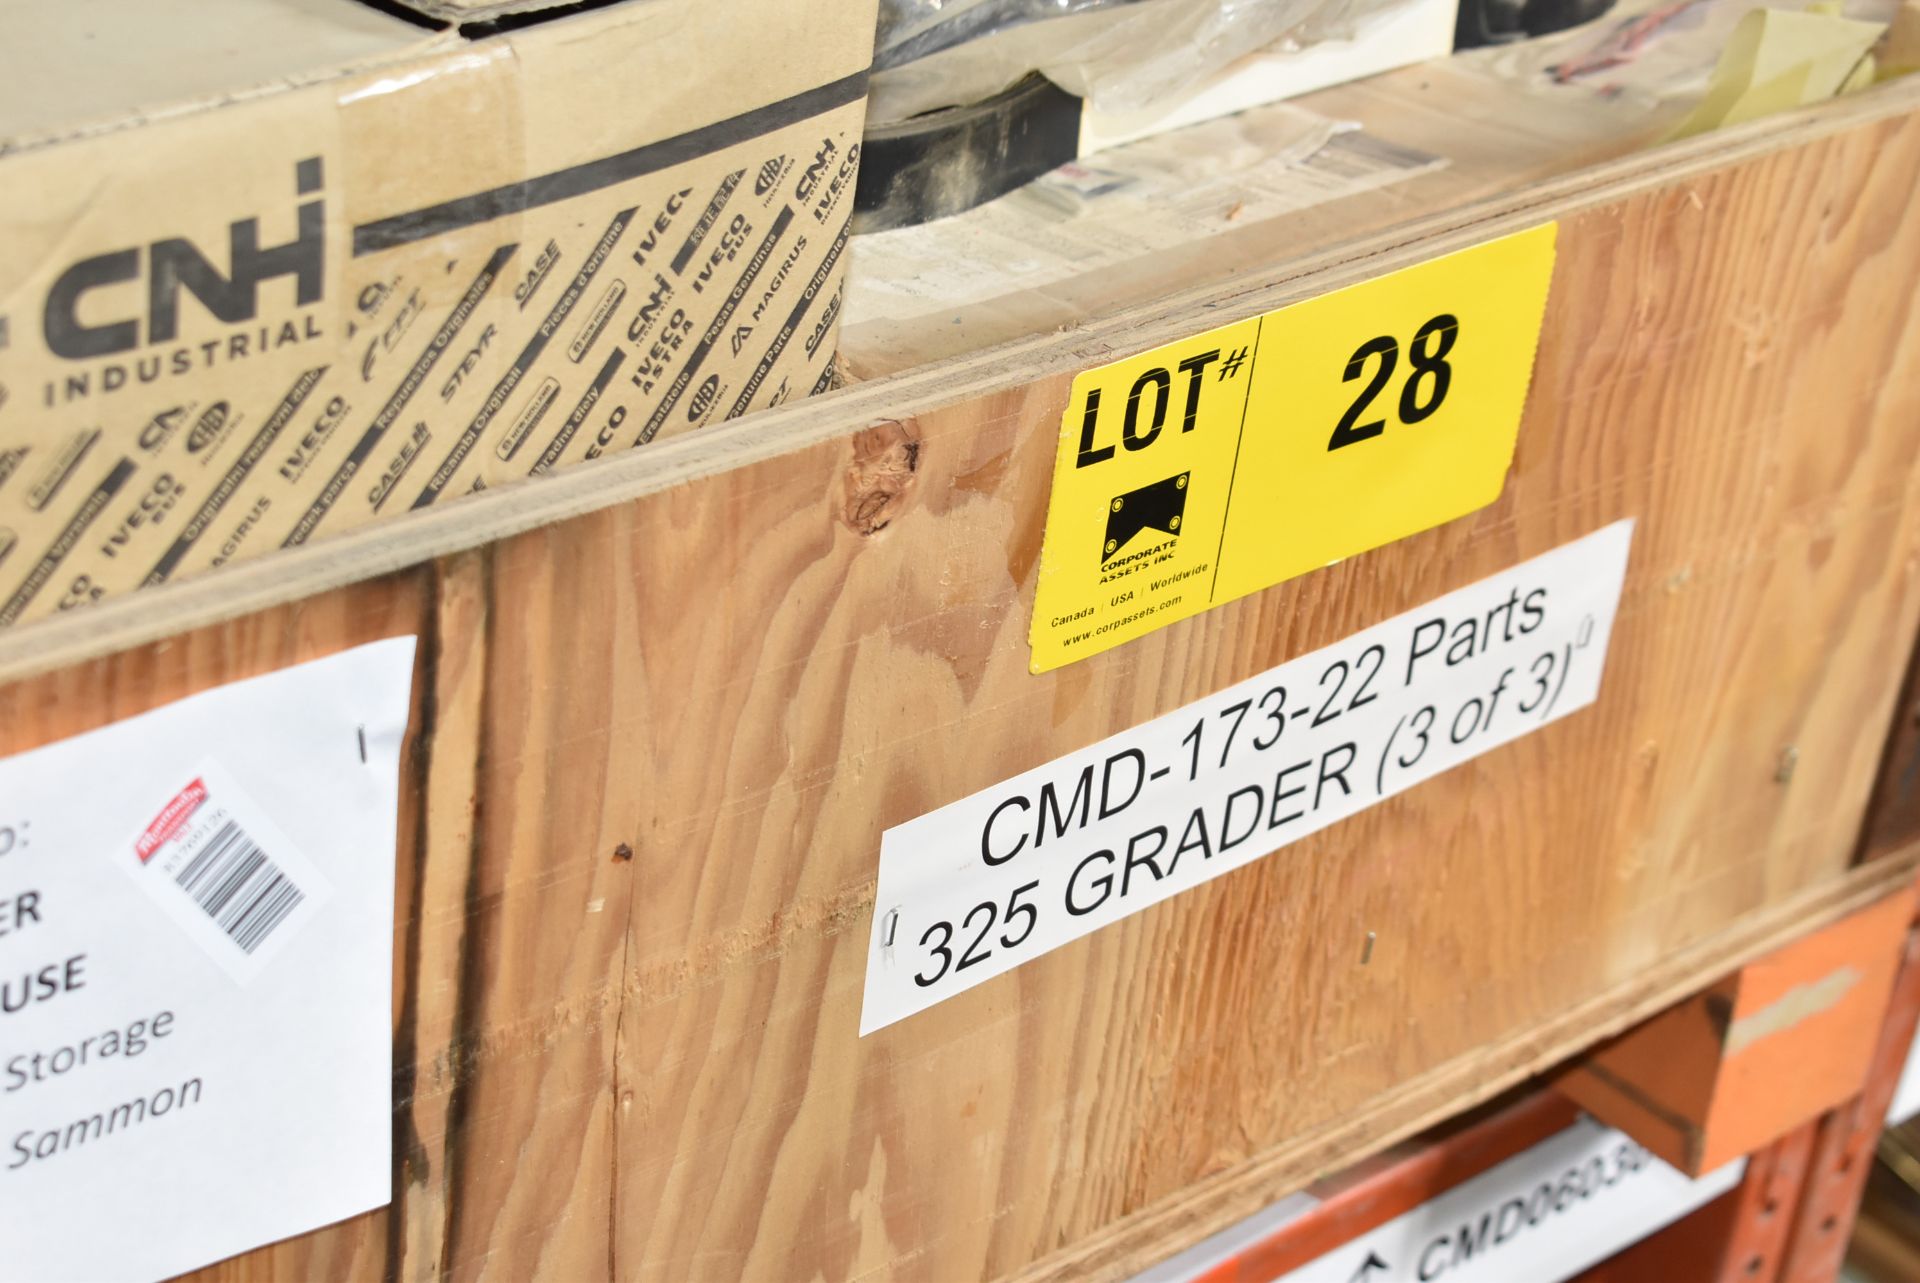 LOT/ CONTENTS OF PALLET CONSISTING OF SPARE PARTS FOR CASE 845D GRADER (CMD-173-22) - Image 2 of 4